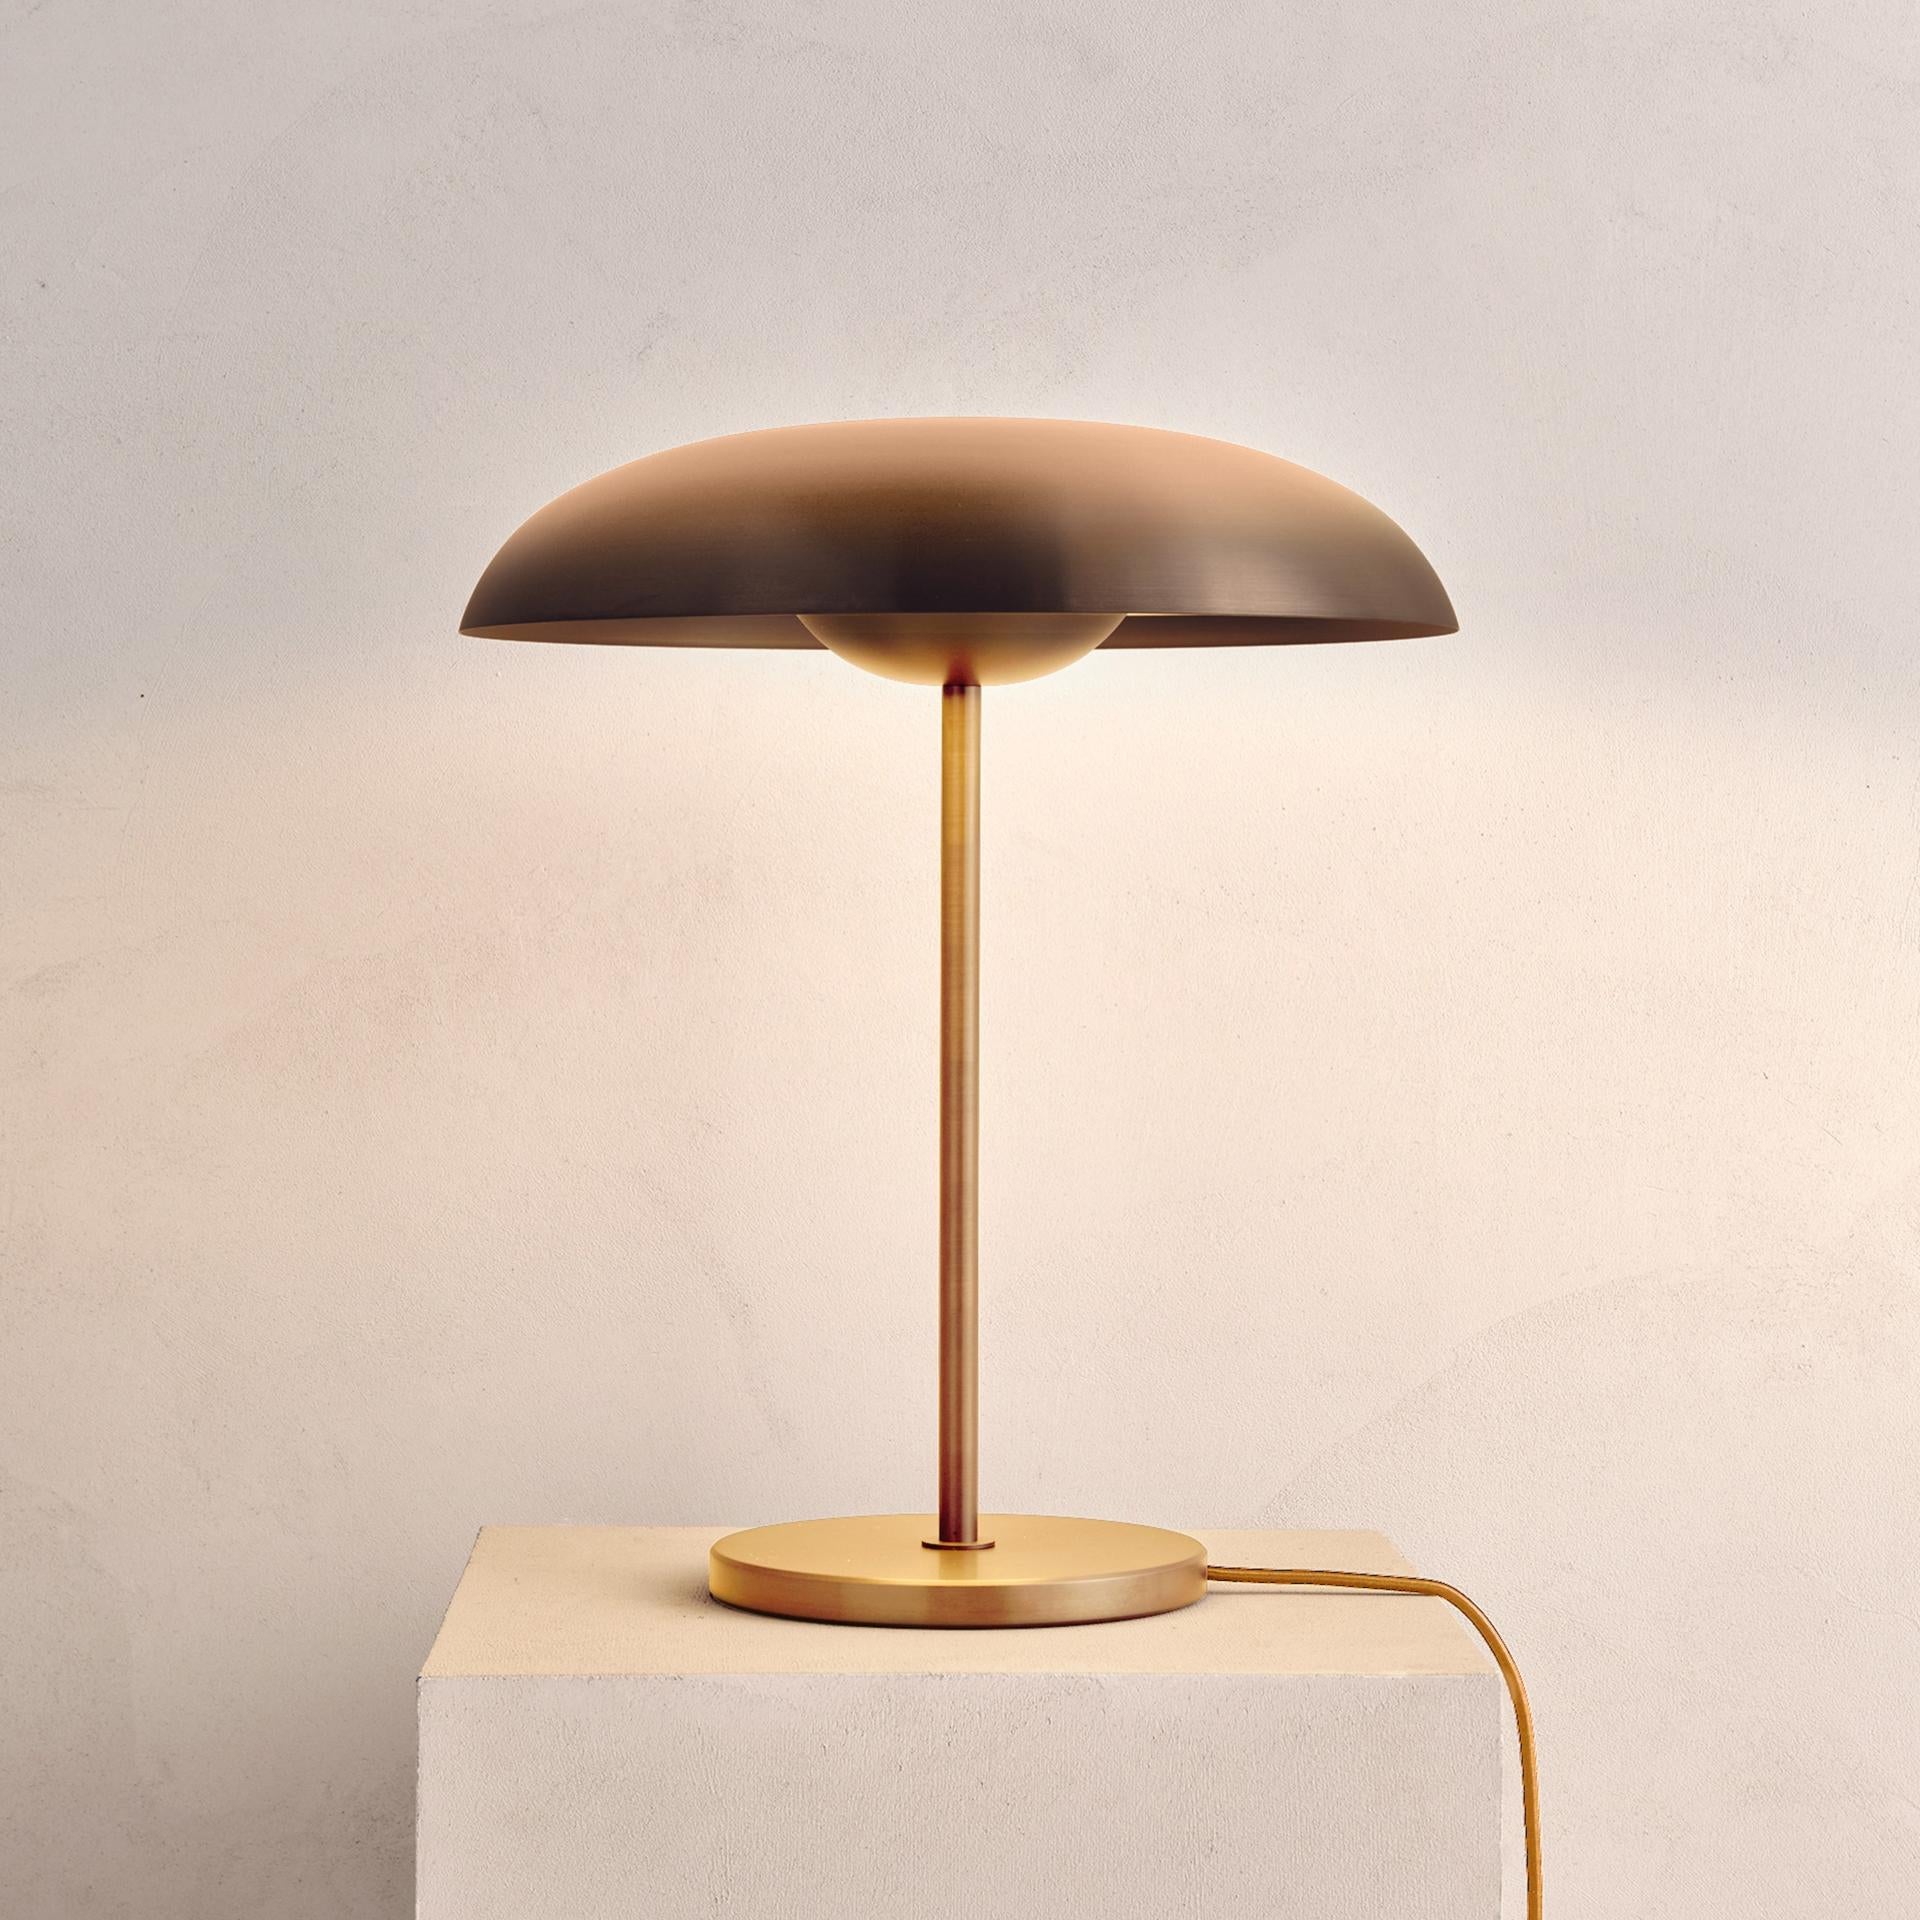 'Cosmic Solstice Ore' Table Lamp, Handmade Bronze Patinated Brass Table Light For Sale